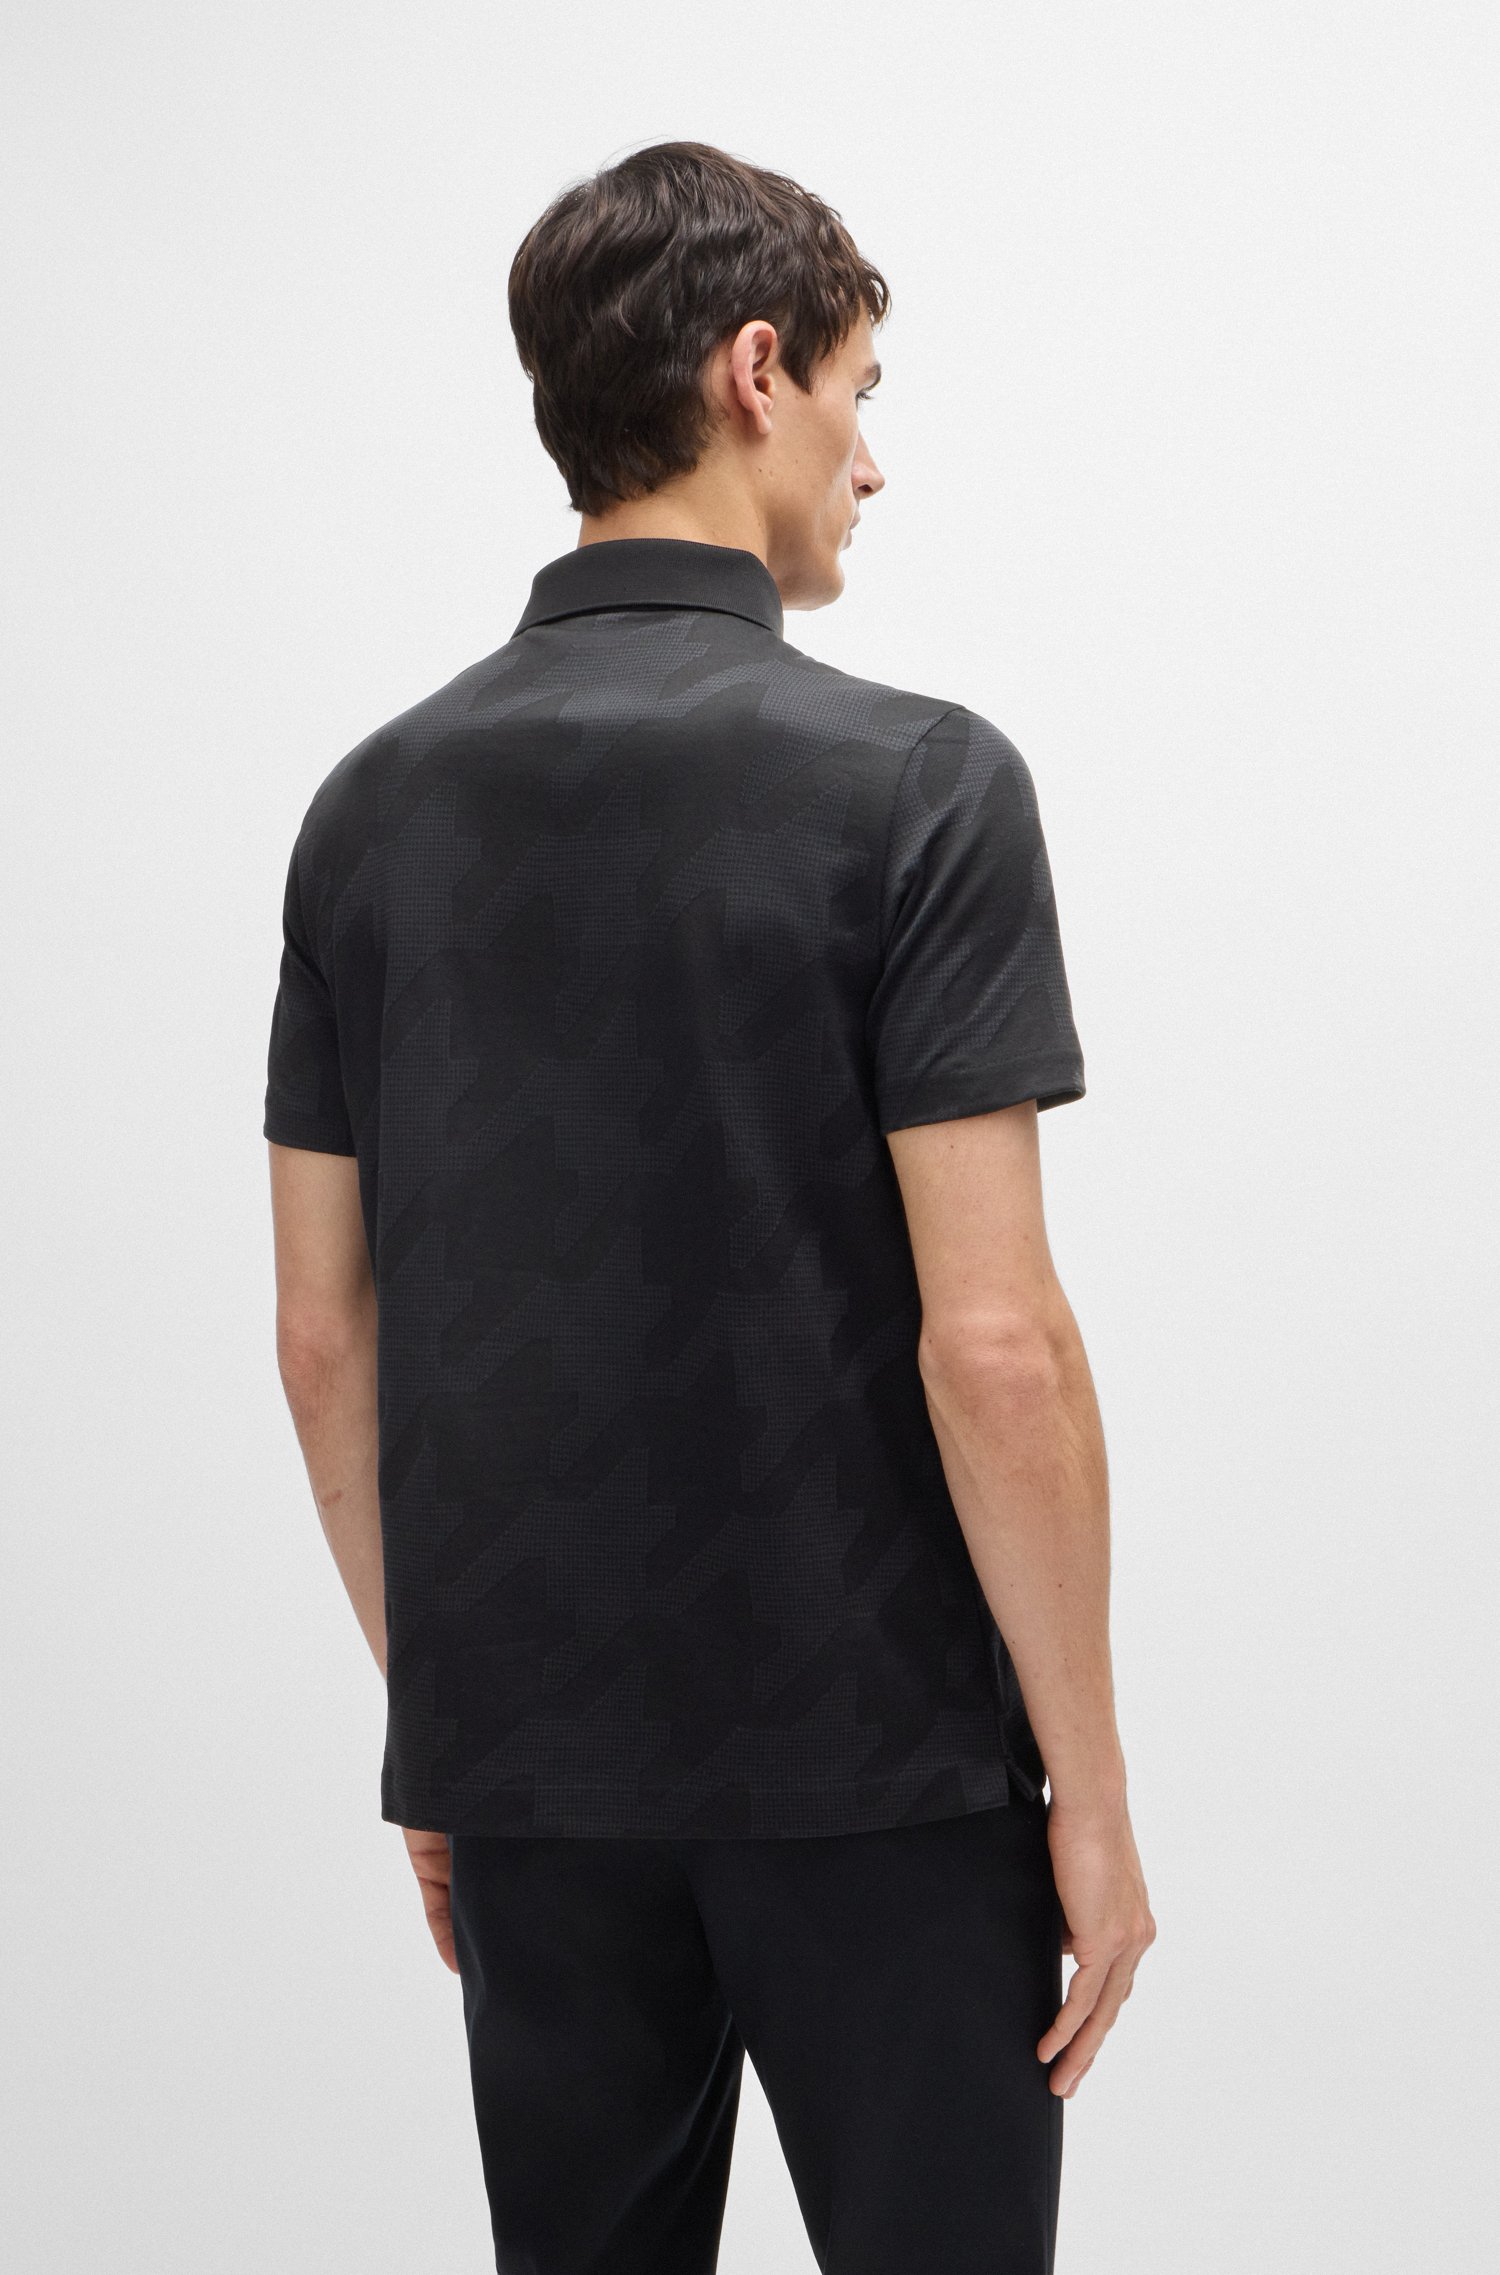 Mercerized-cotton slim-fit polo shirt with houndstooth jacquard